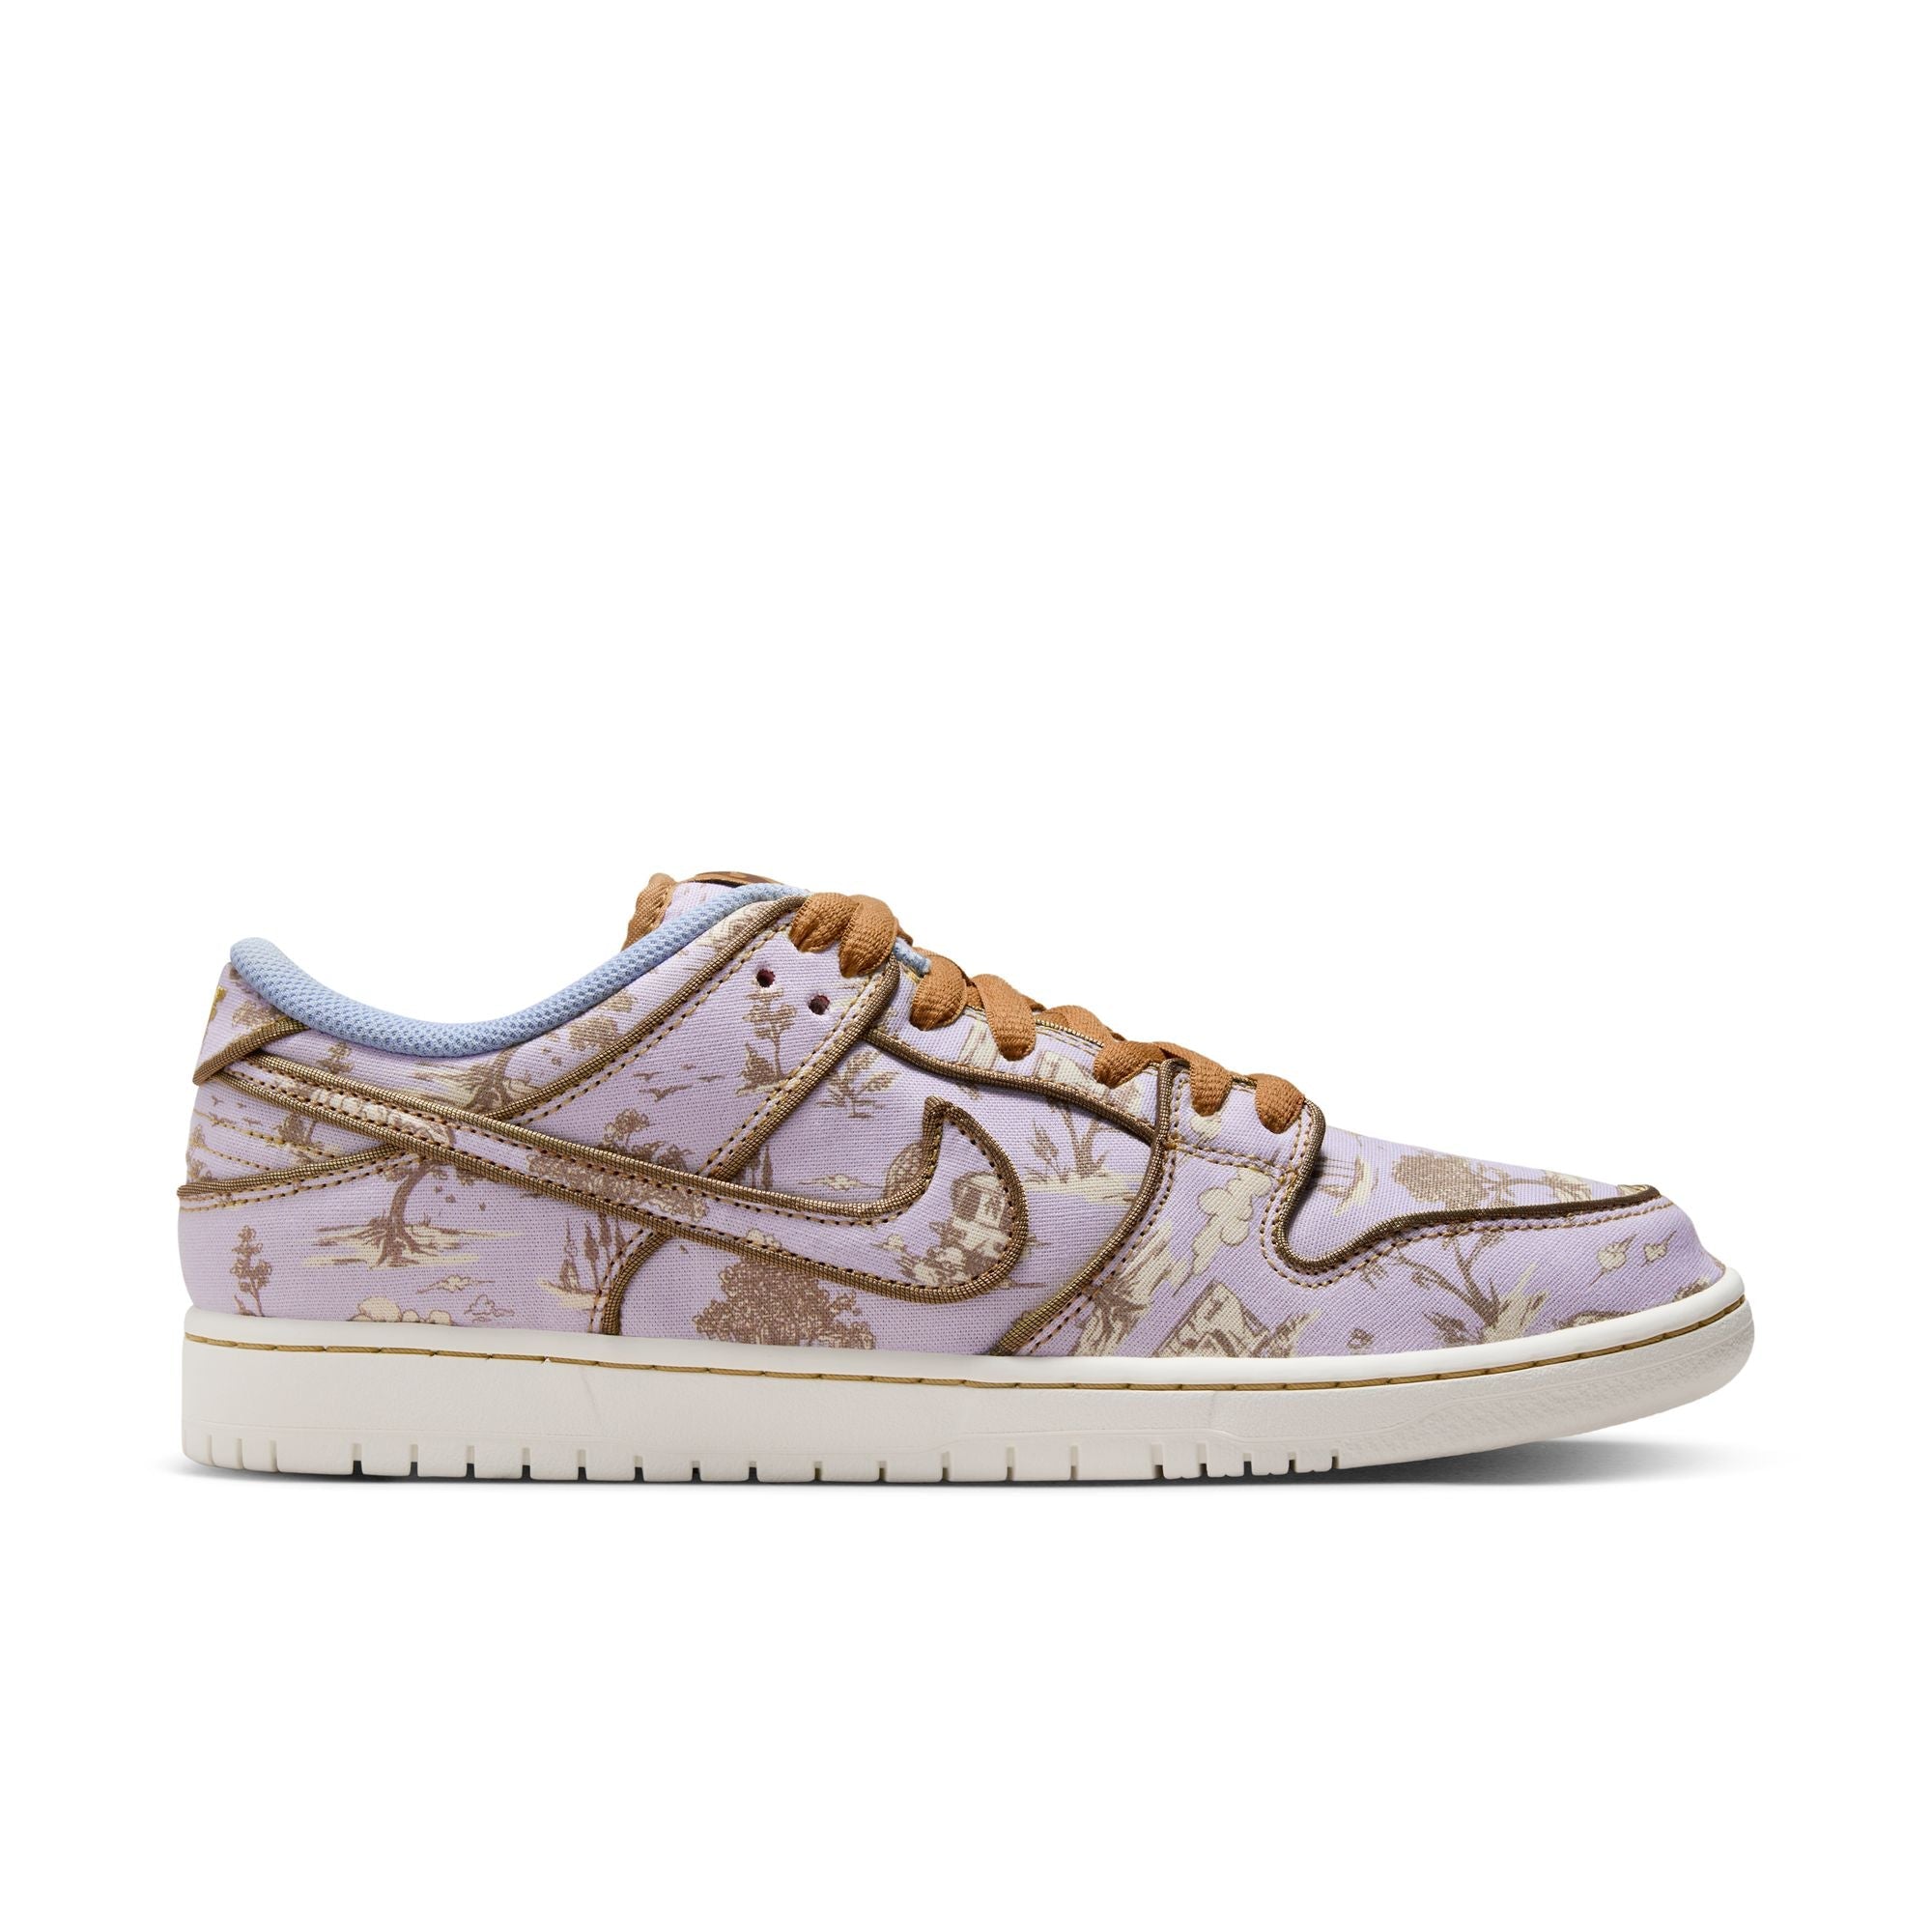 Purple Nike sb dunk low pro premium shoes with pastoral print, white midsole and brown laces. Free uk shipping over £50